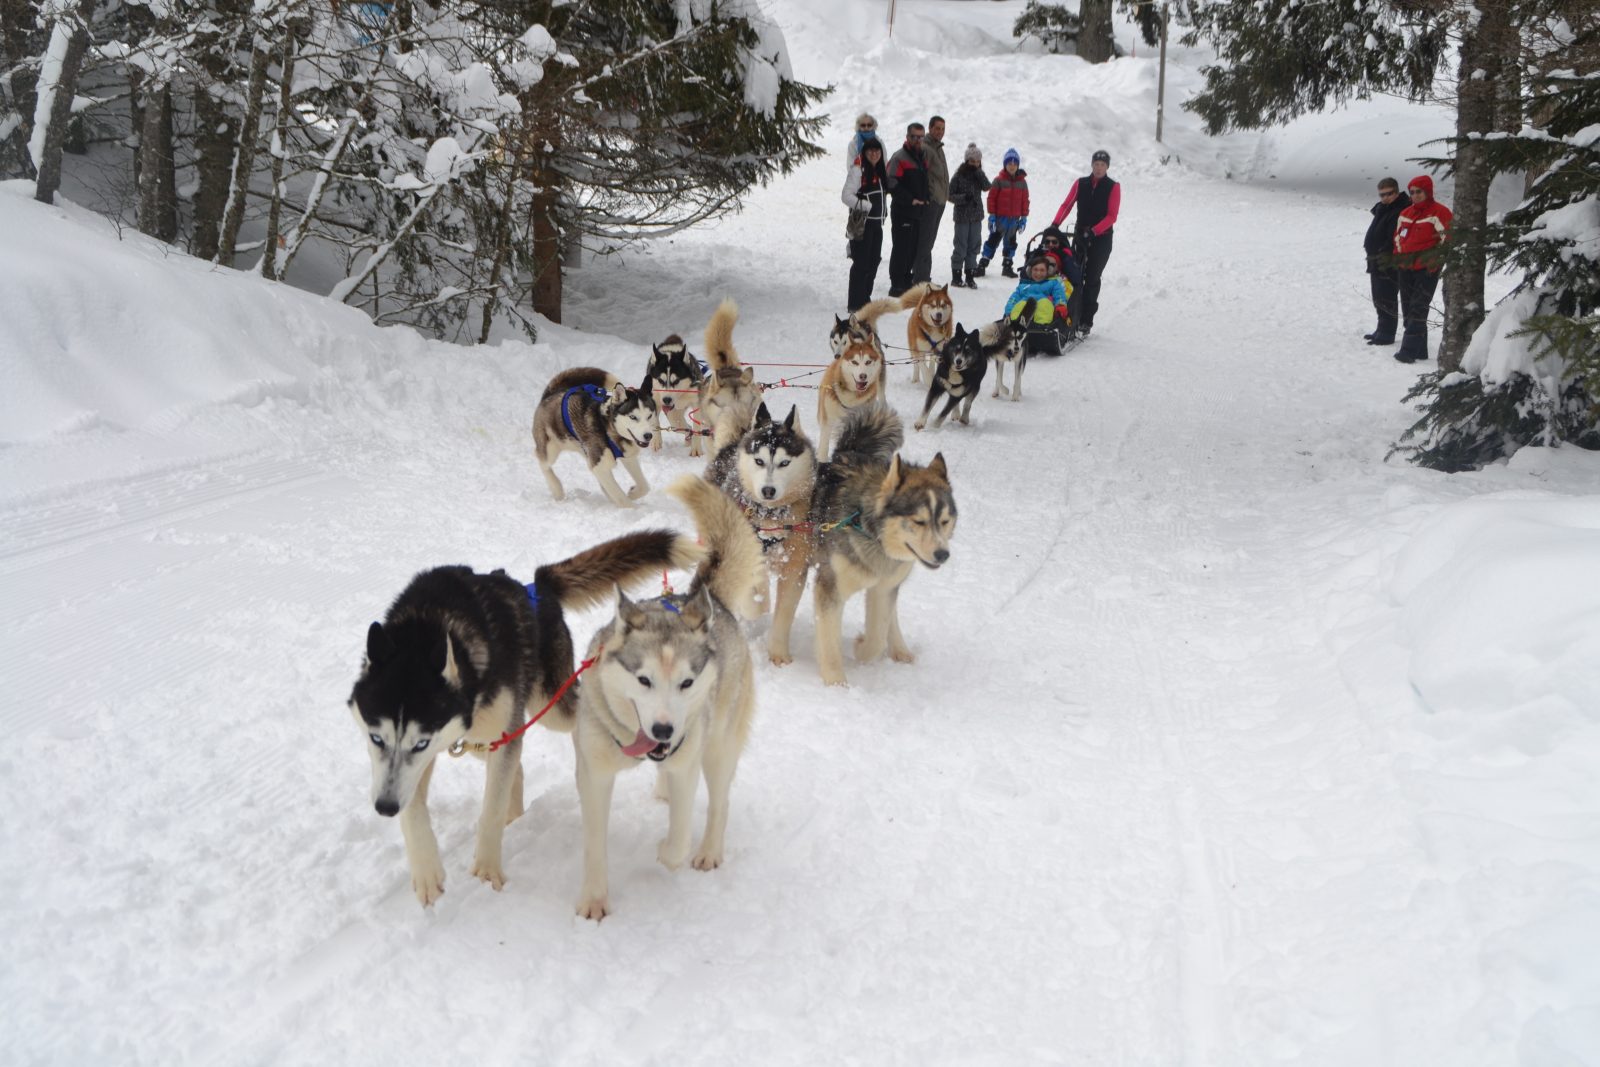 Sled pulled by dogs